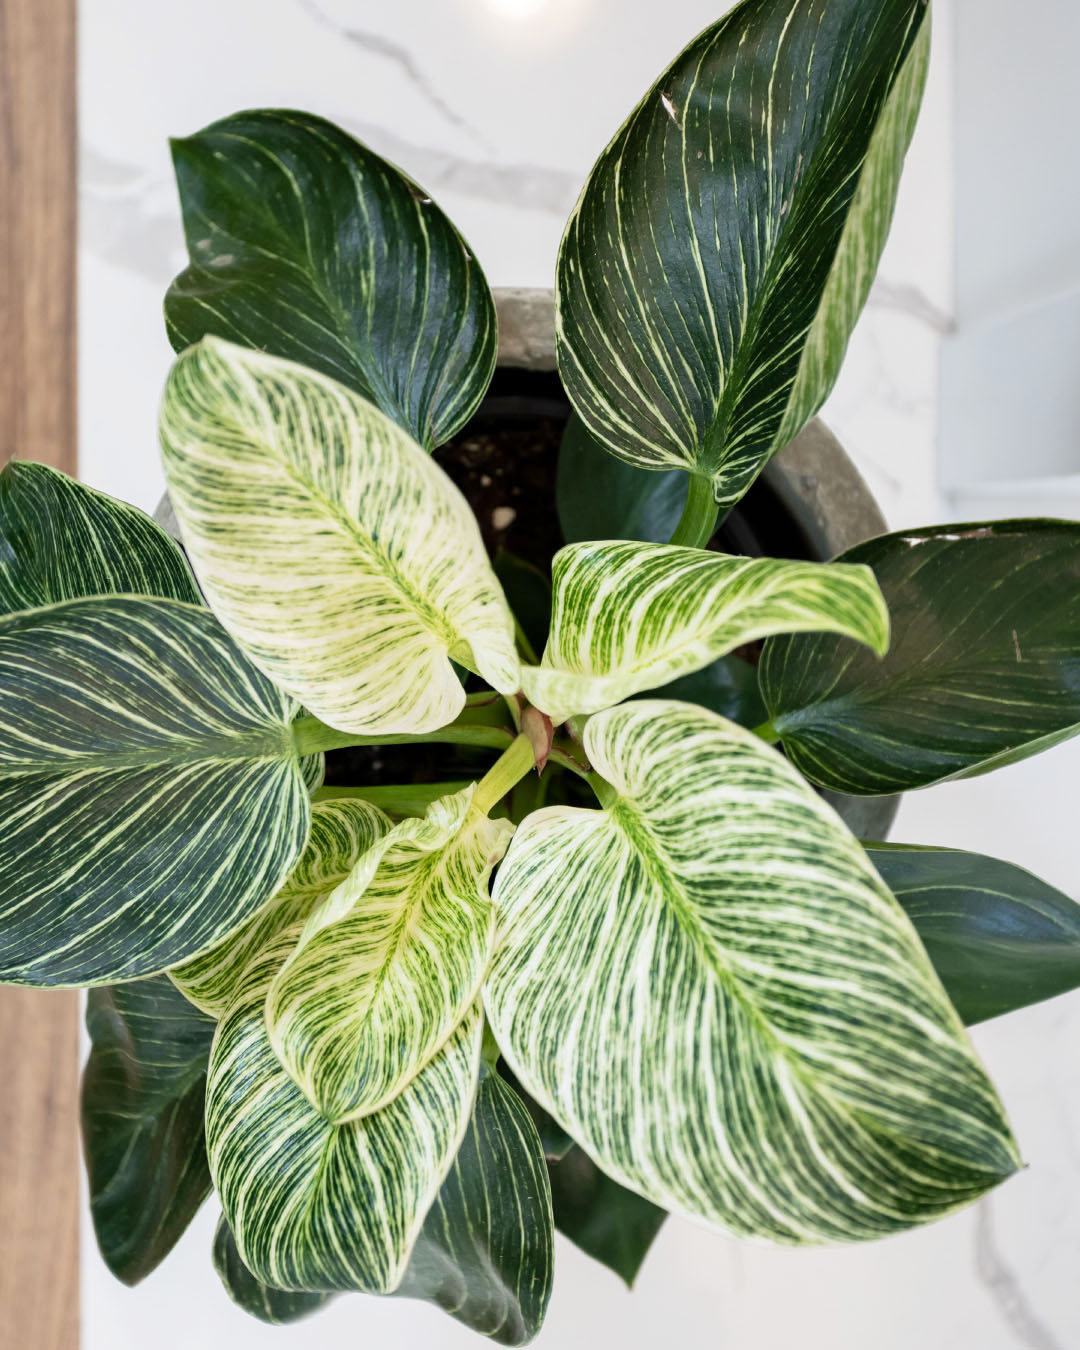 Today I'm going to tell you about another absolute favourite houseplant of mine. Here's how to grow a philodendron Birkin!